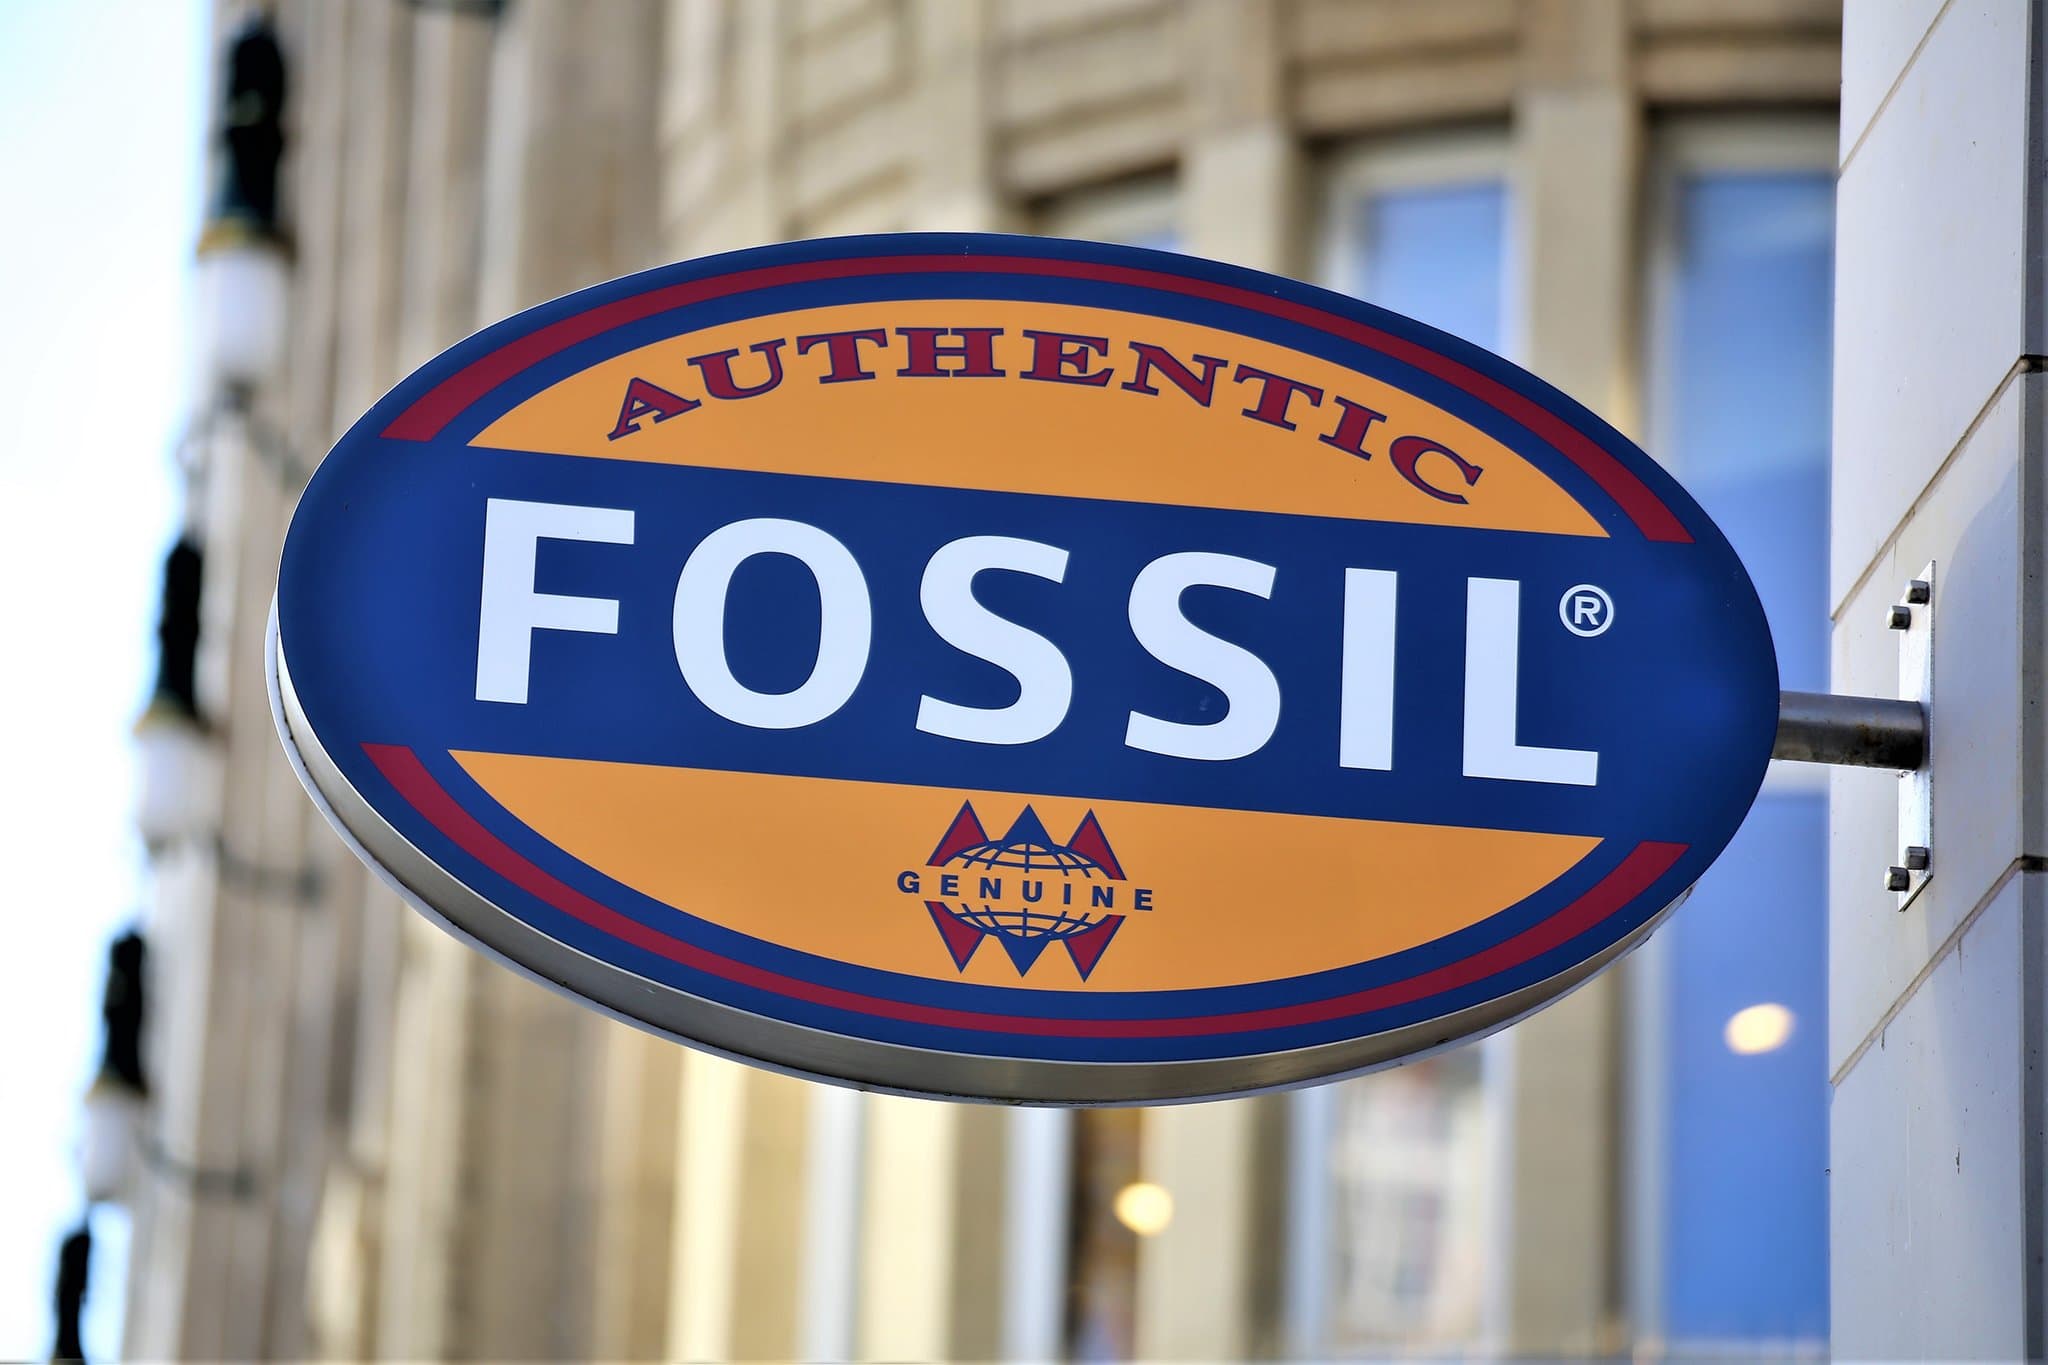 Fossil is an American brand that draws inspiration from vintage American style